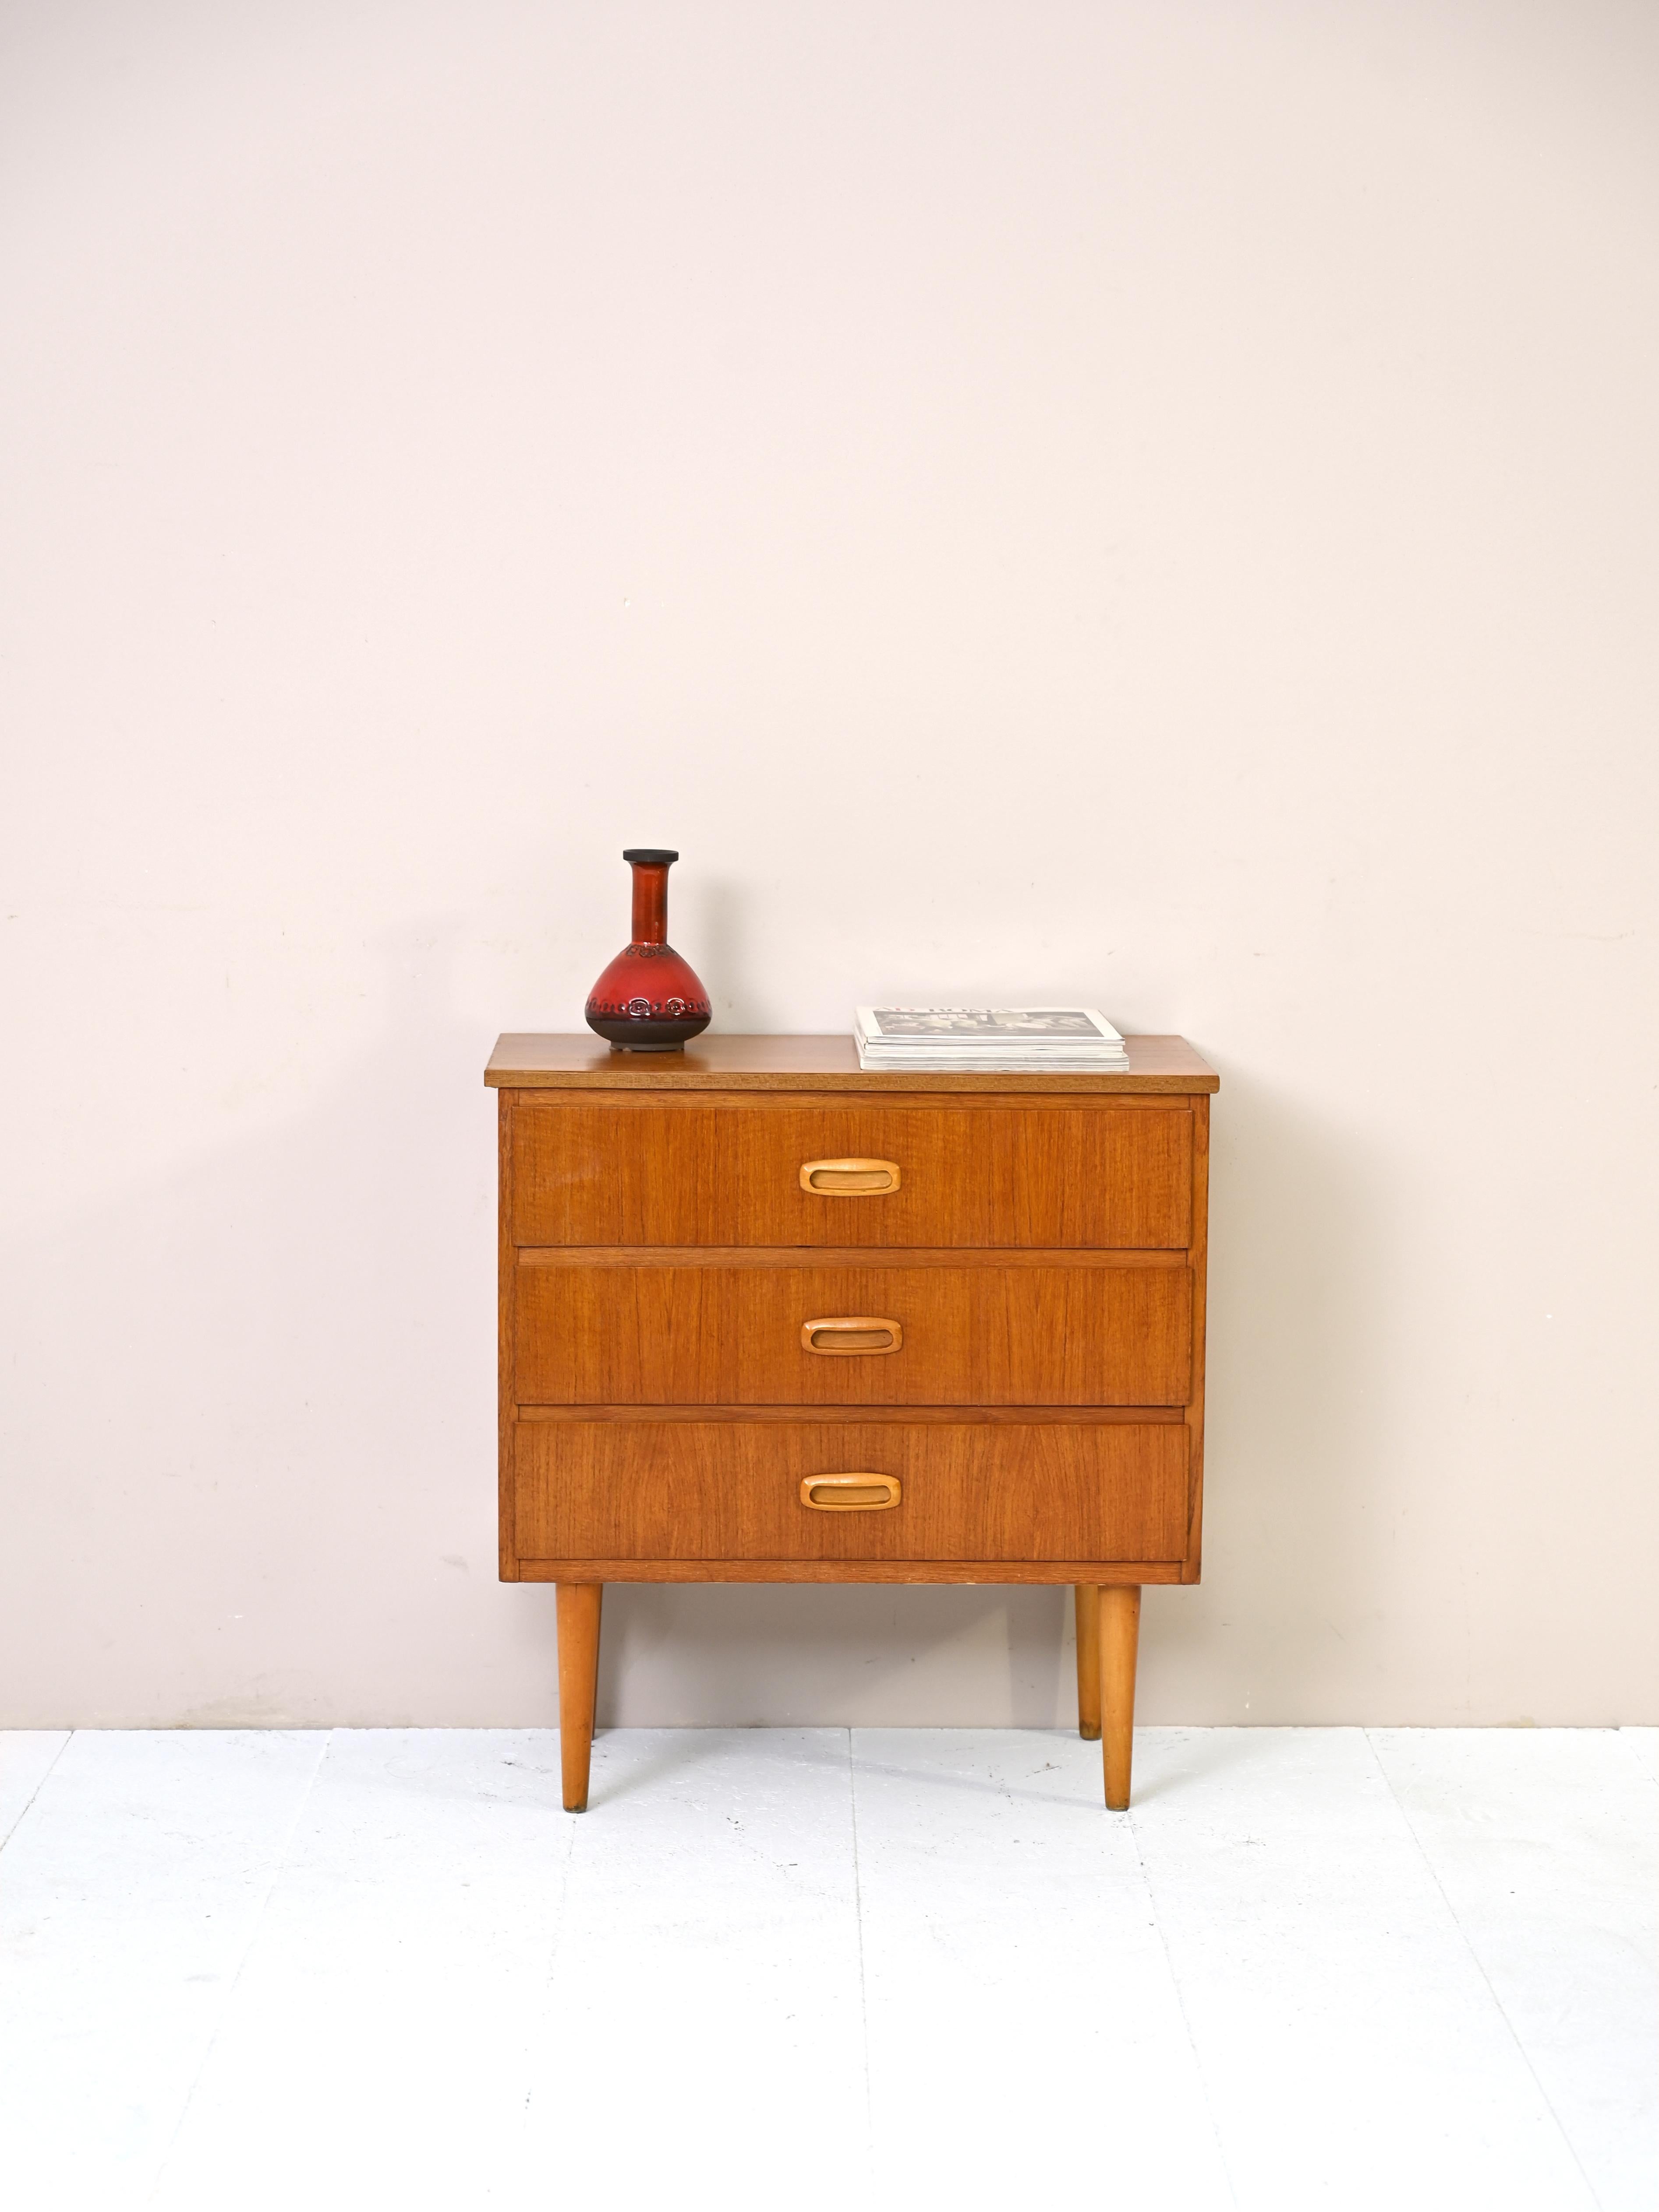 An original mid-century Nordic design furniture piece.
The teak wood frame is linear and uncluttered but enhanced by the wooden handle of the
drawers and the long tapered legs.
A piece of furniture that can be used both with the classic function